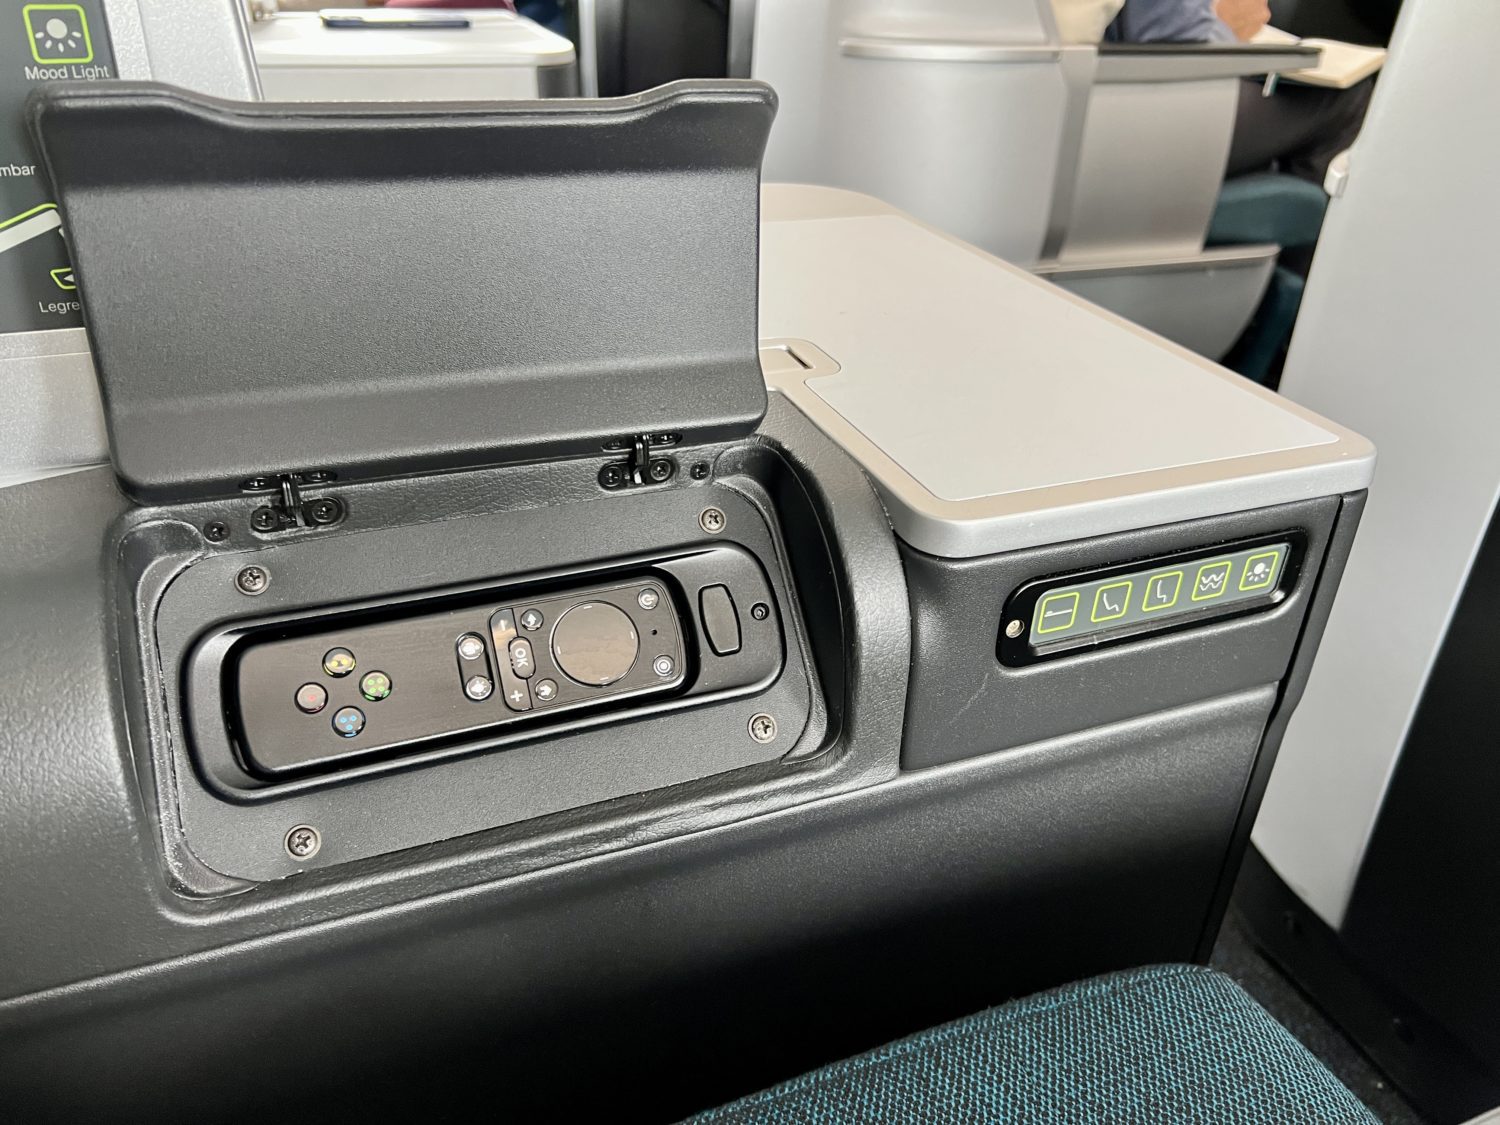 aer lingus business class seat  Aer Lingus Business Class Review, A321 Dublin to Washington, DC &#8211; Thrifty Traveler aer lingus business class more controls scaled